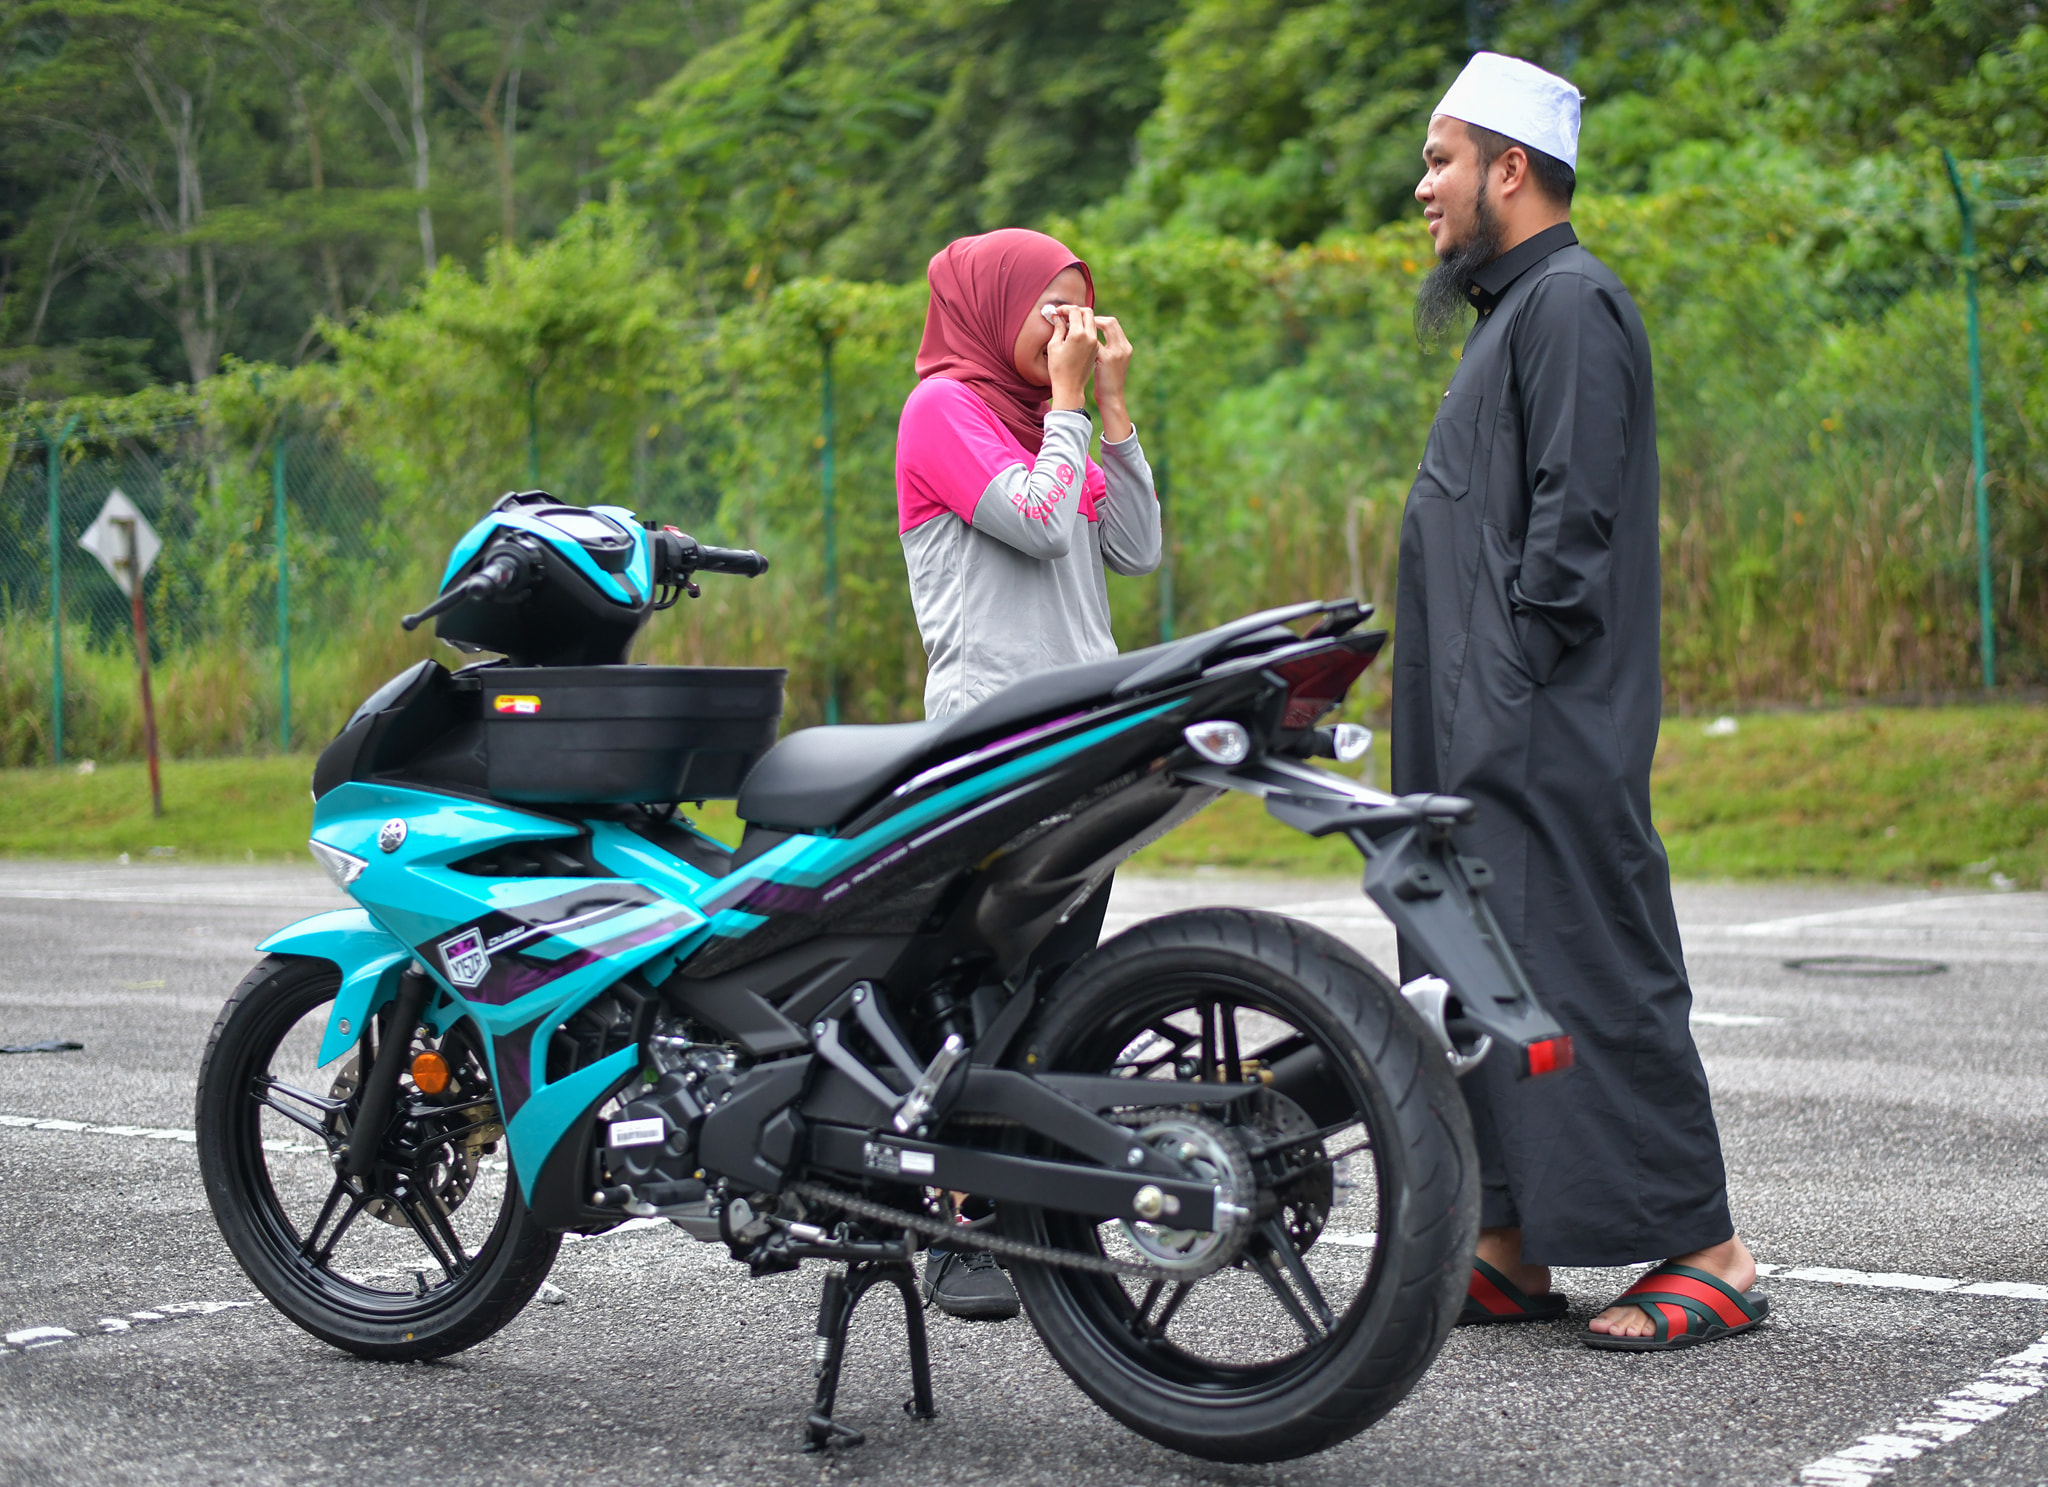 In learning about the challenges she faced, Ebit gifted the single mum a brand-new motorbike to help her with her deliveries. Image credit: Ebit Lew